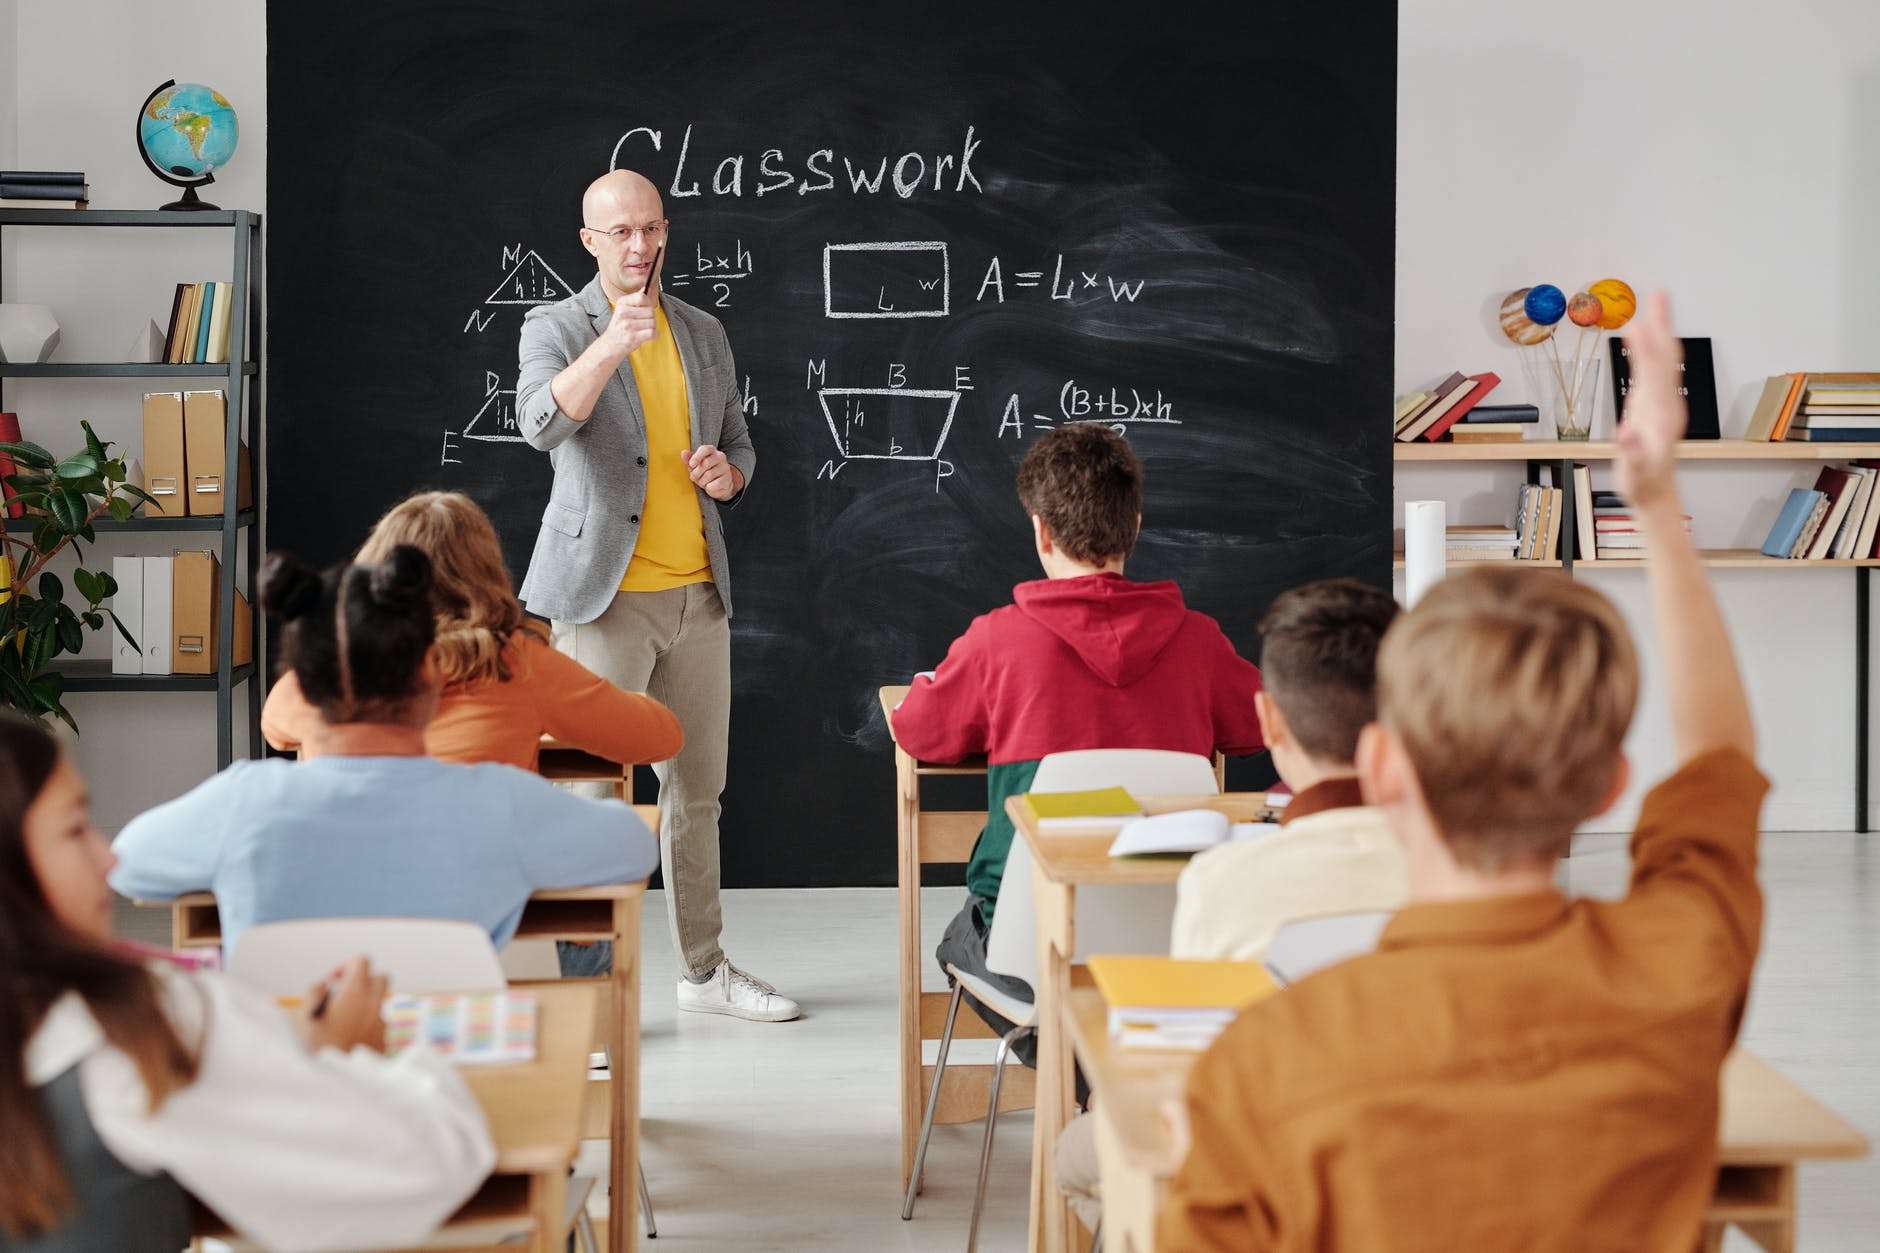 teacher asking a question to the class: should I homeschool my child?